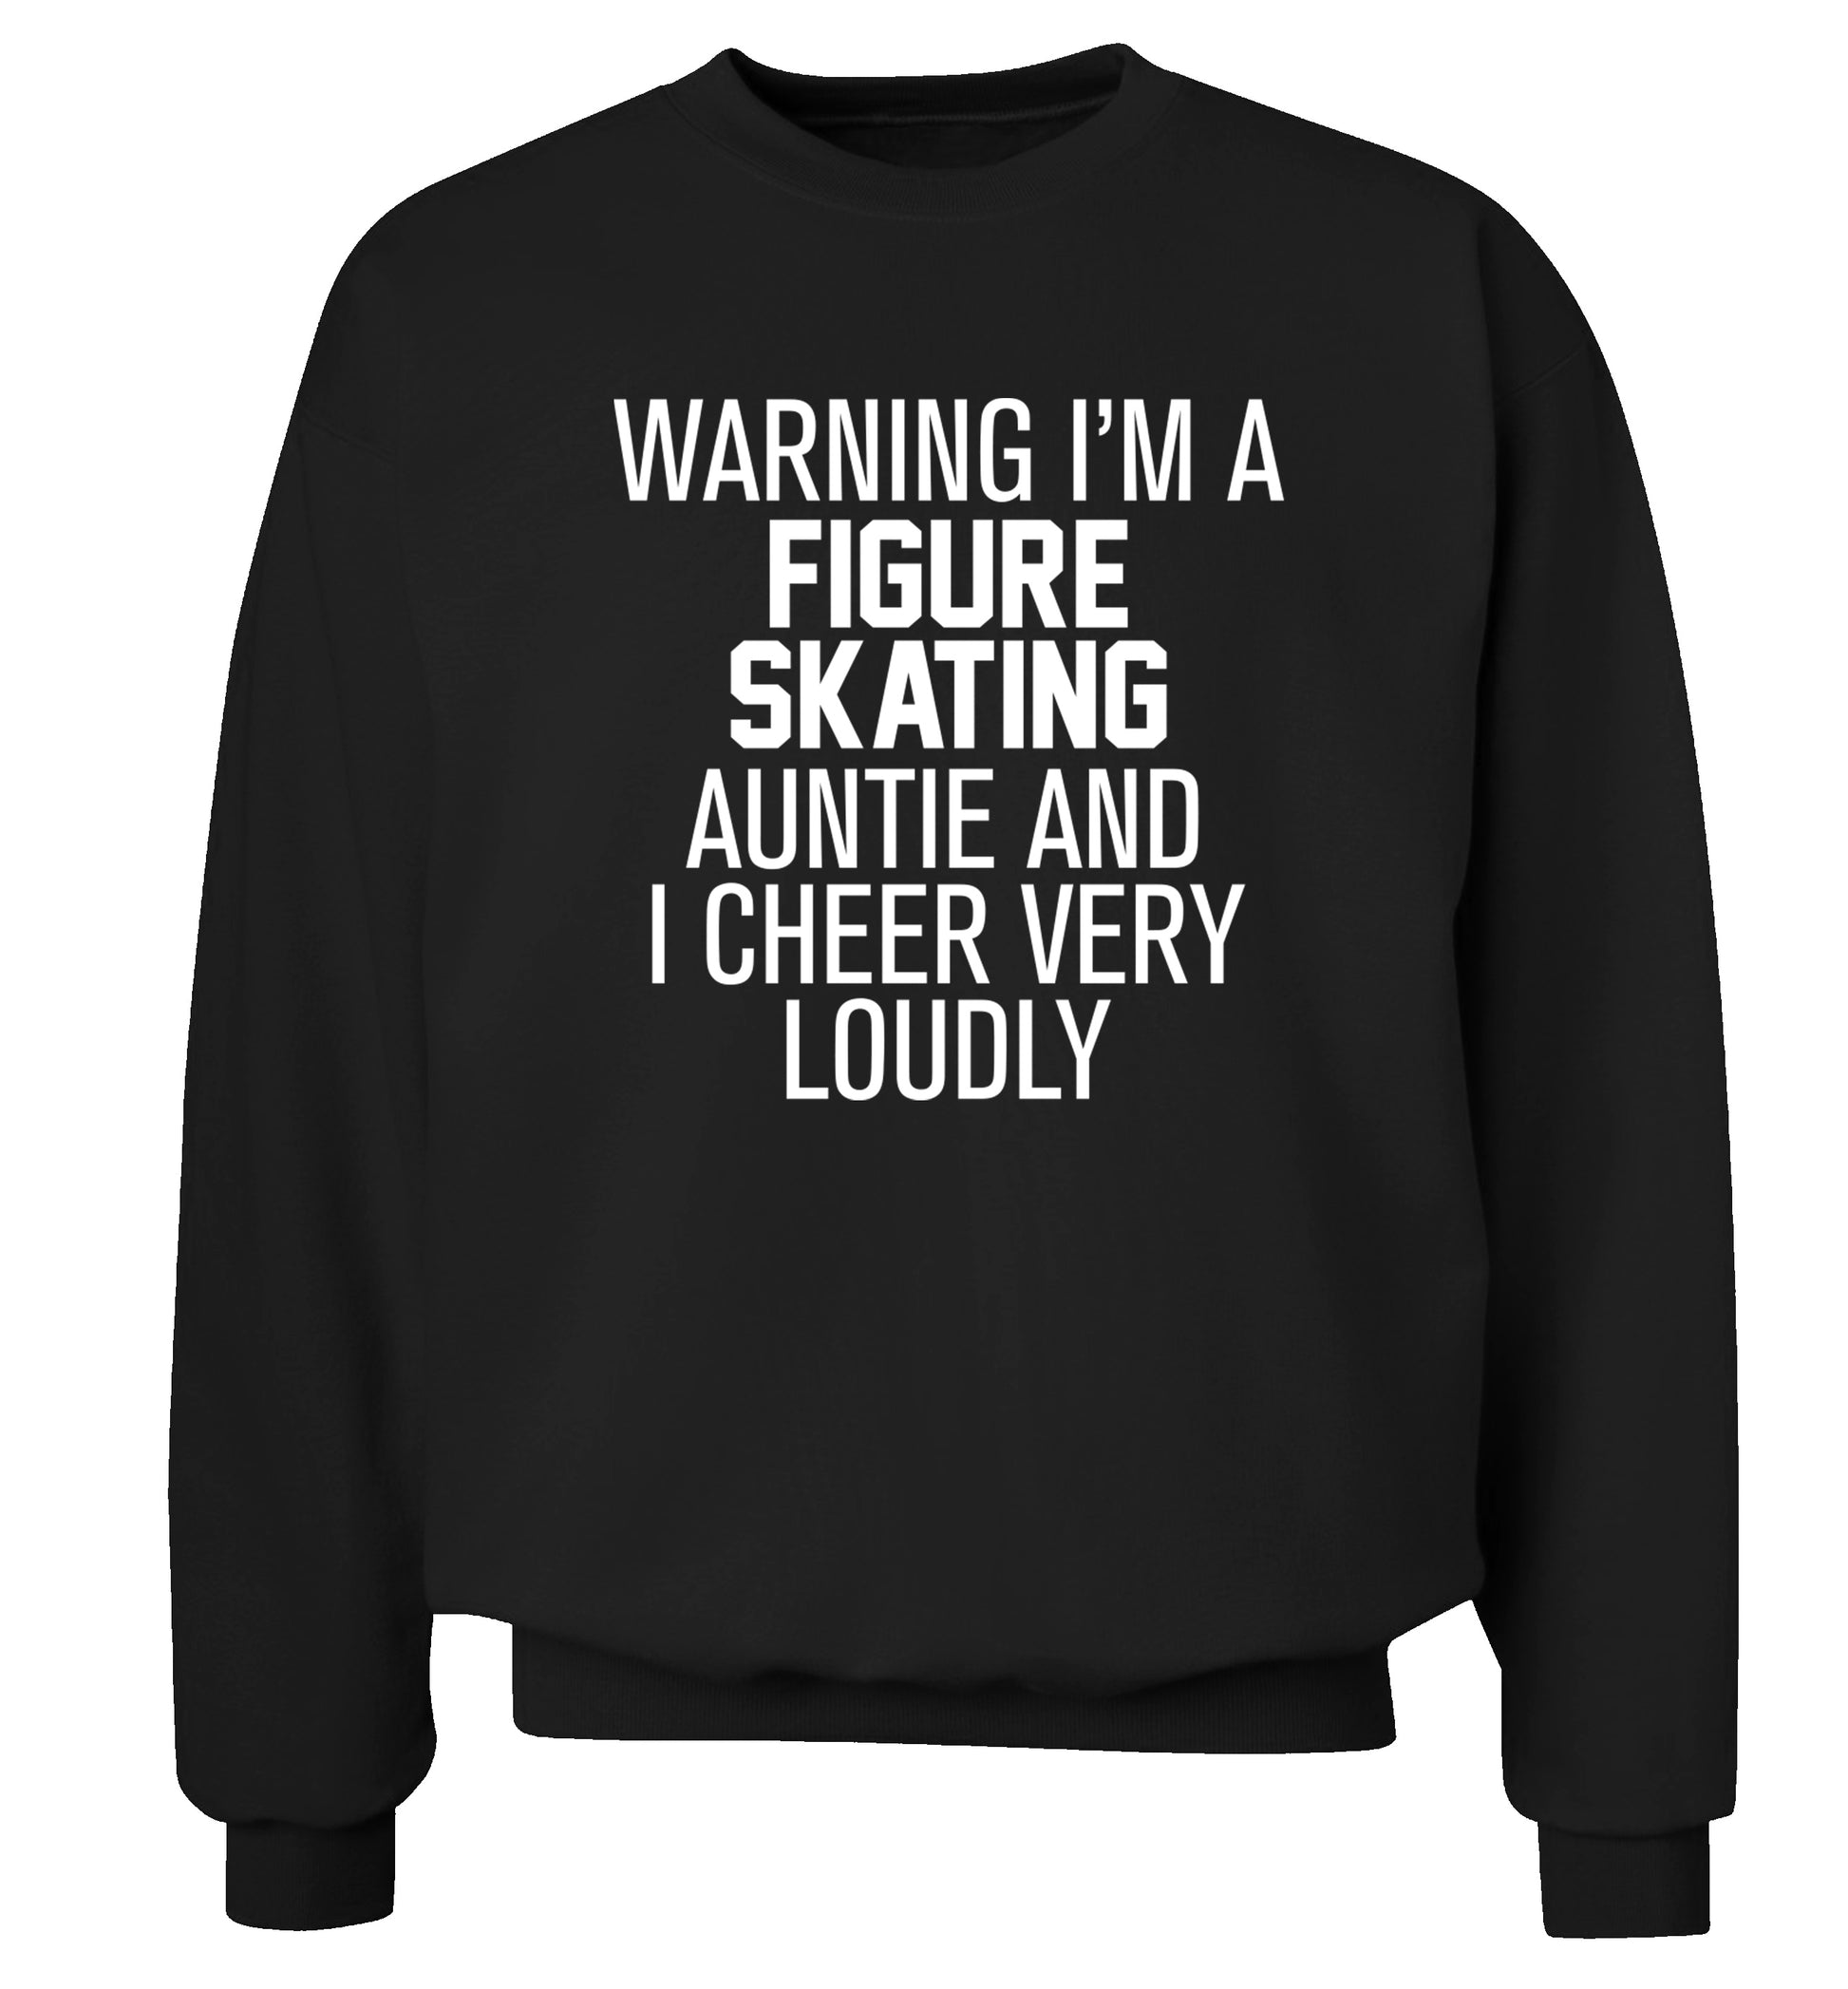 Warning I'm a figure skating auntie and I cheer very loudly Adult's unisexblack Sweater 2XL